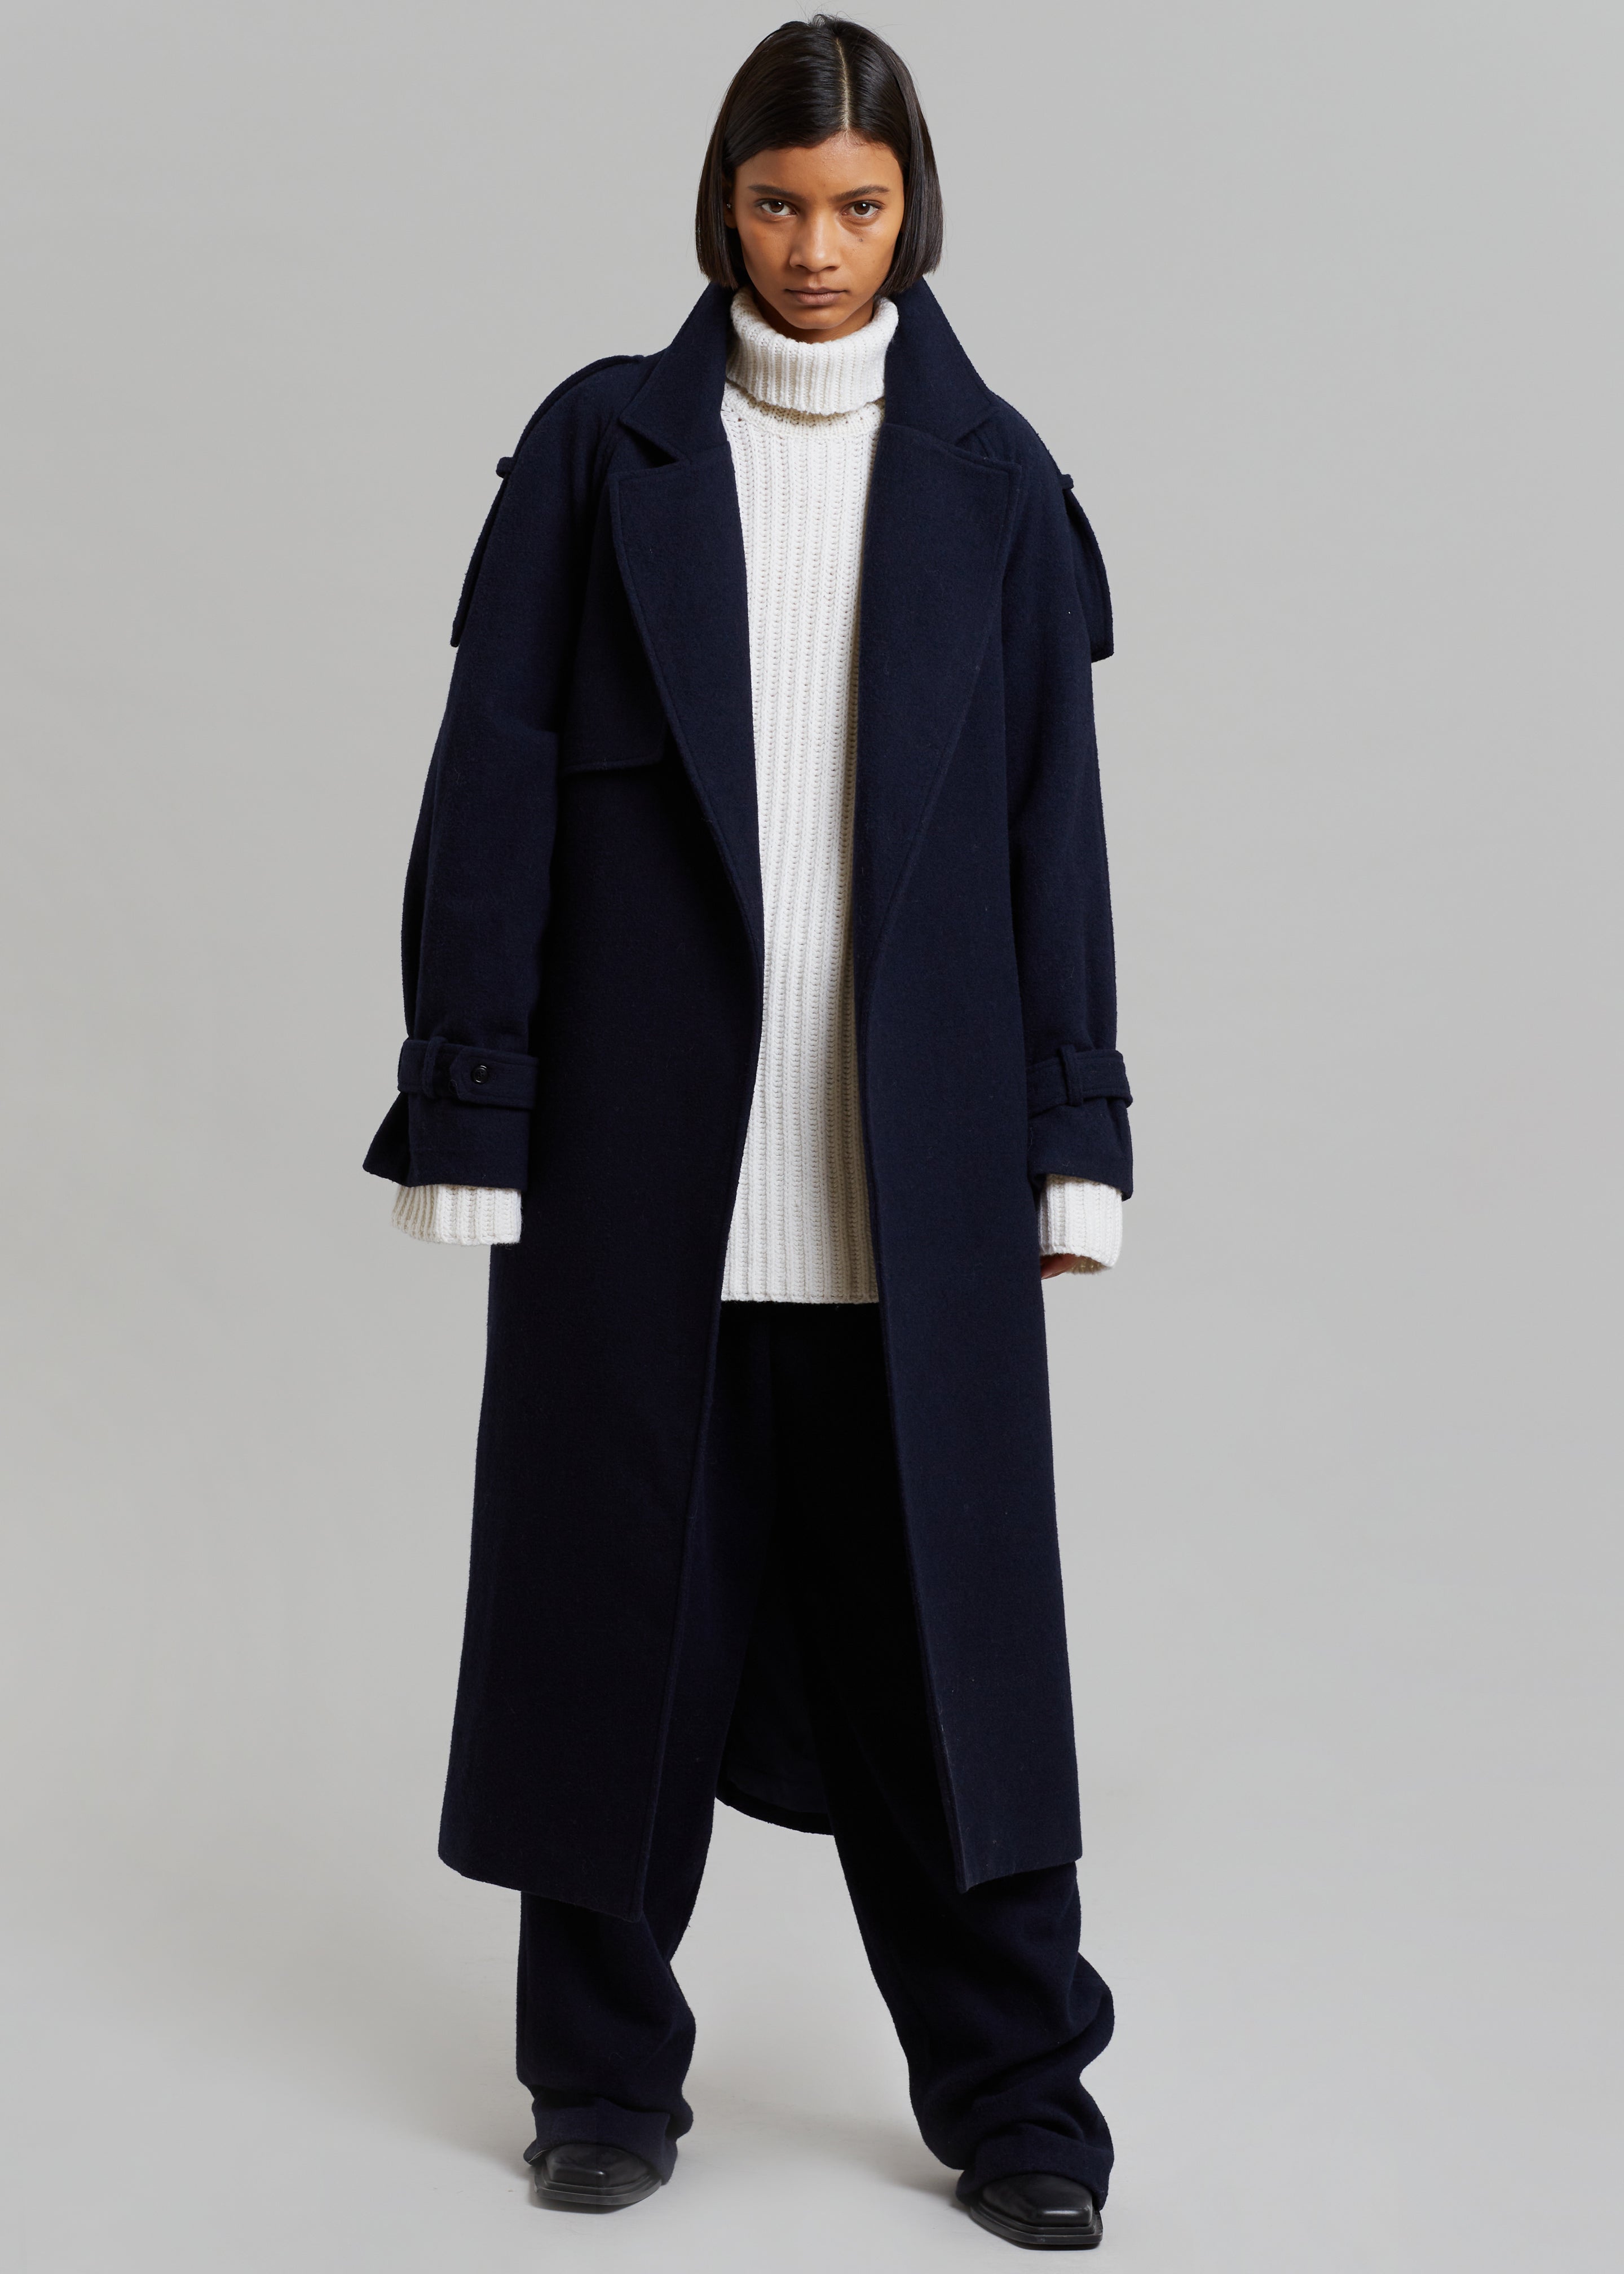 Suzanne Wool Trench Coat - Navy - 5